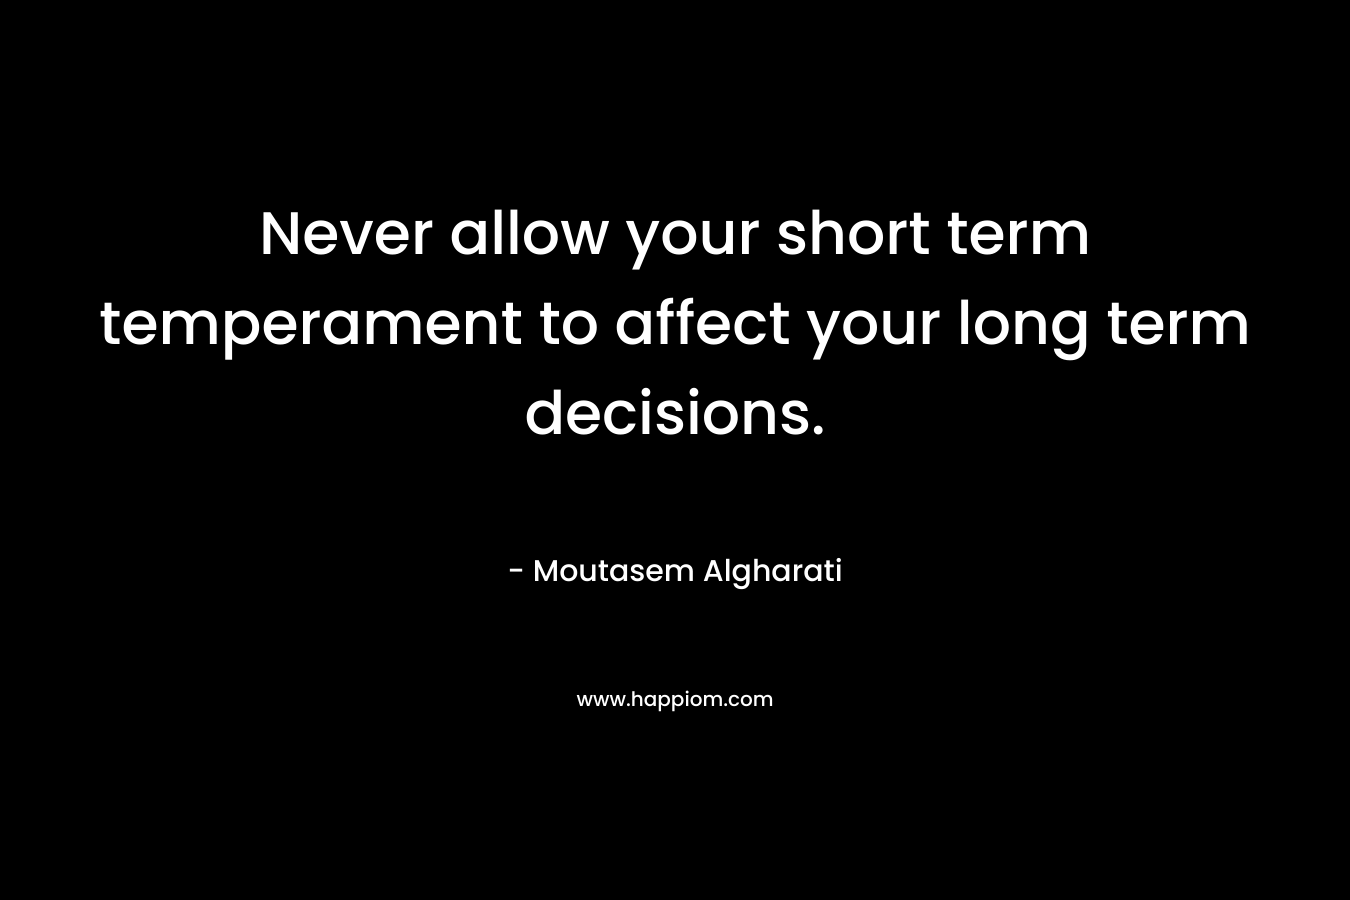 Never allow your short term temperament to affect your long term decisions.